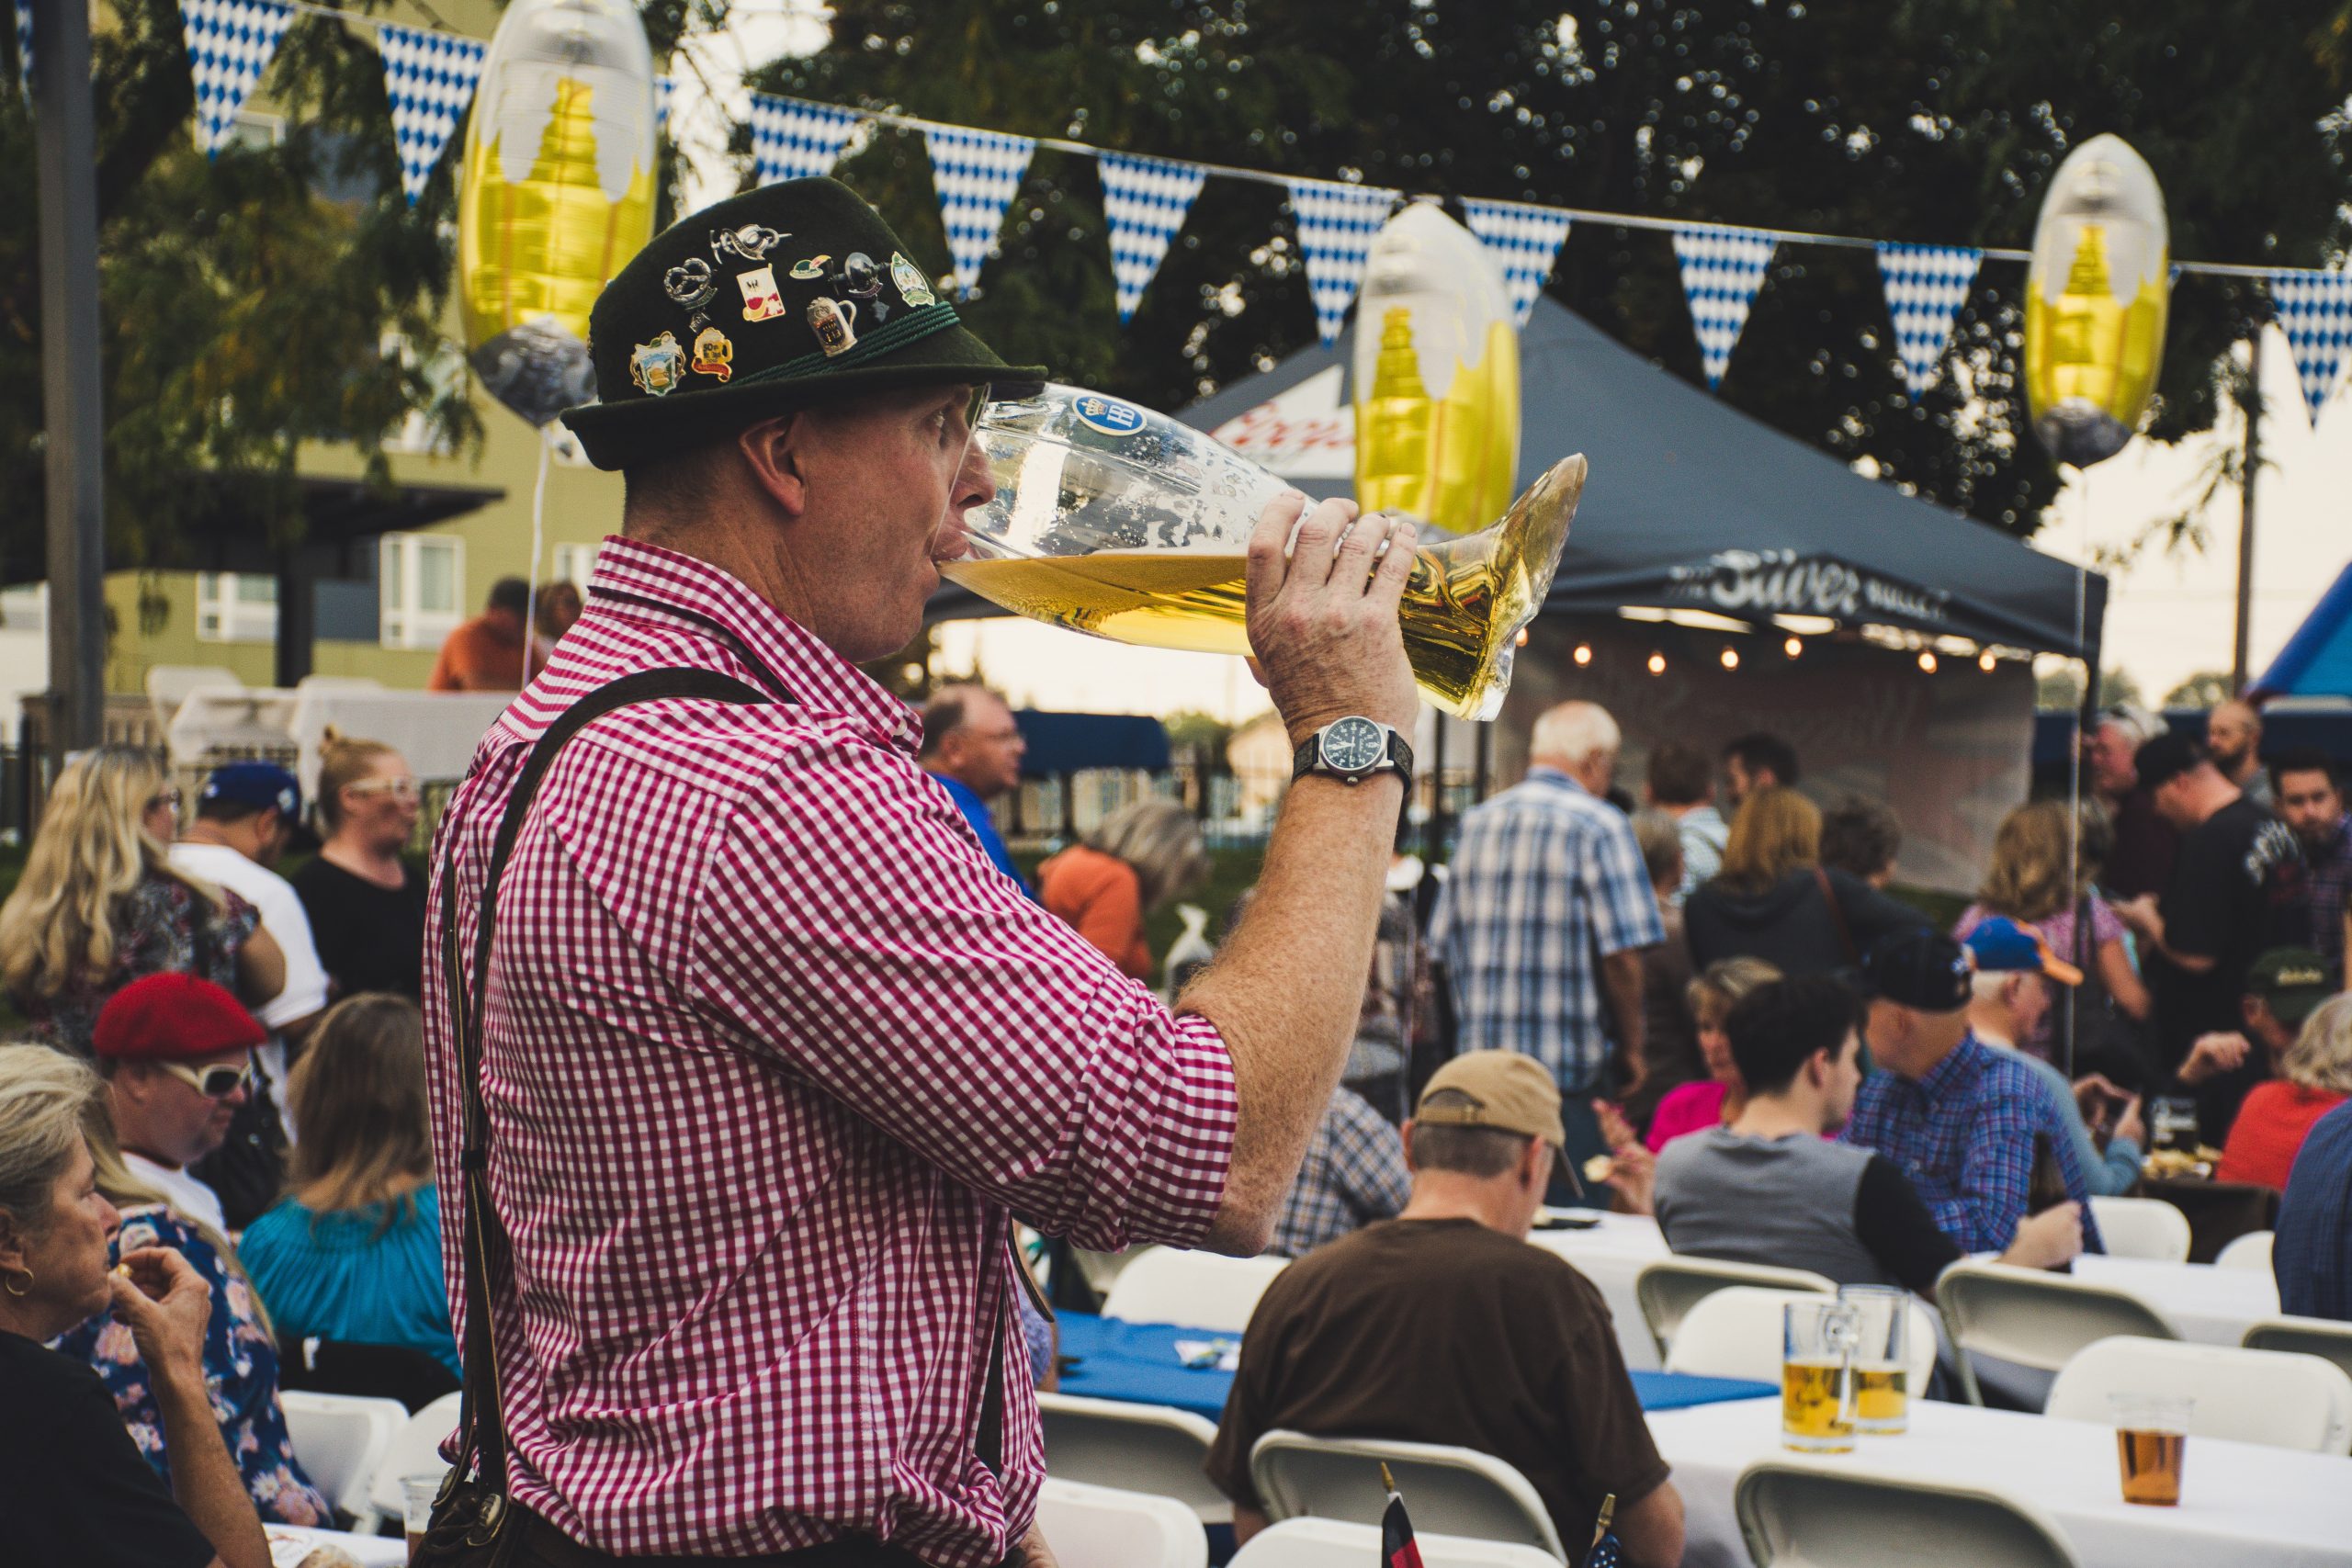 Minister in the Prime Minister's Department (Religious Affairs) Datuk Idris Ahmad said that the Oktoberfest celebrations should not be held in Malaysia. Image credit: Brett Sayles via Pexels